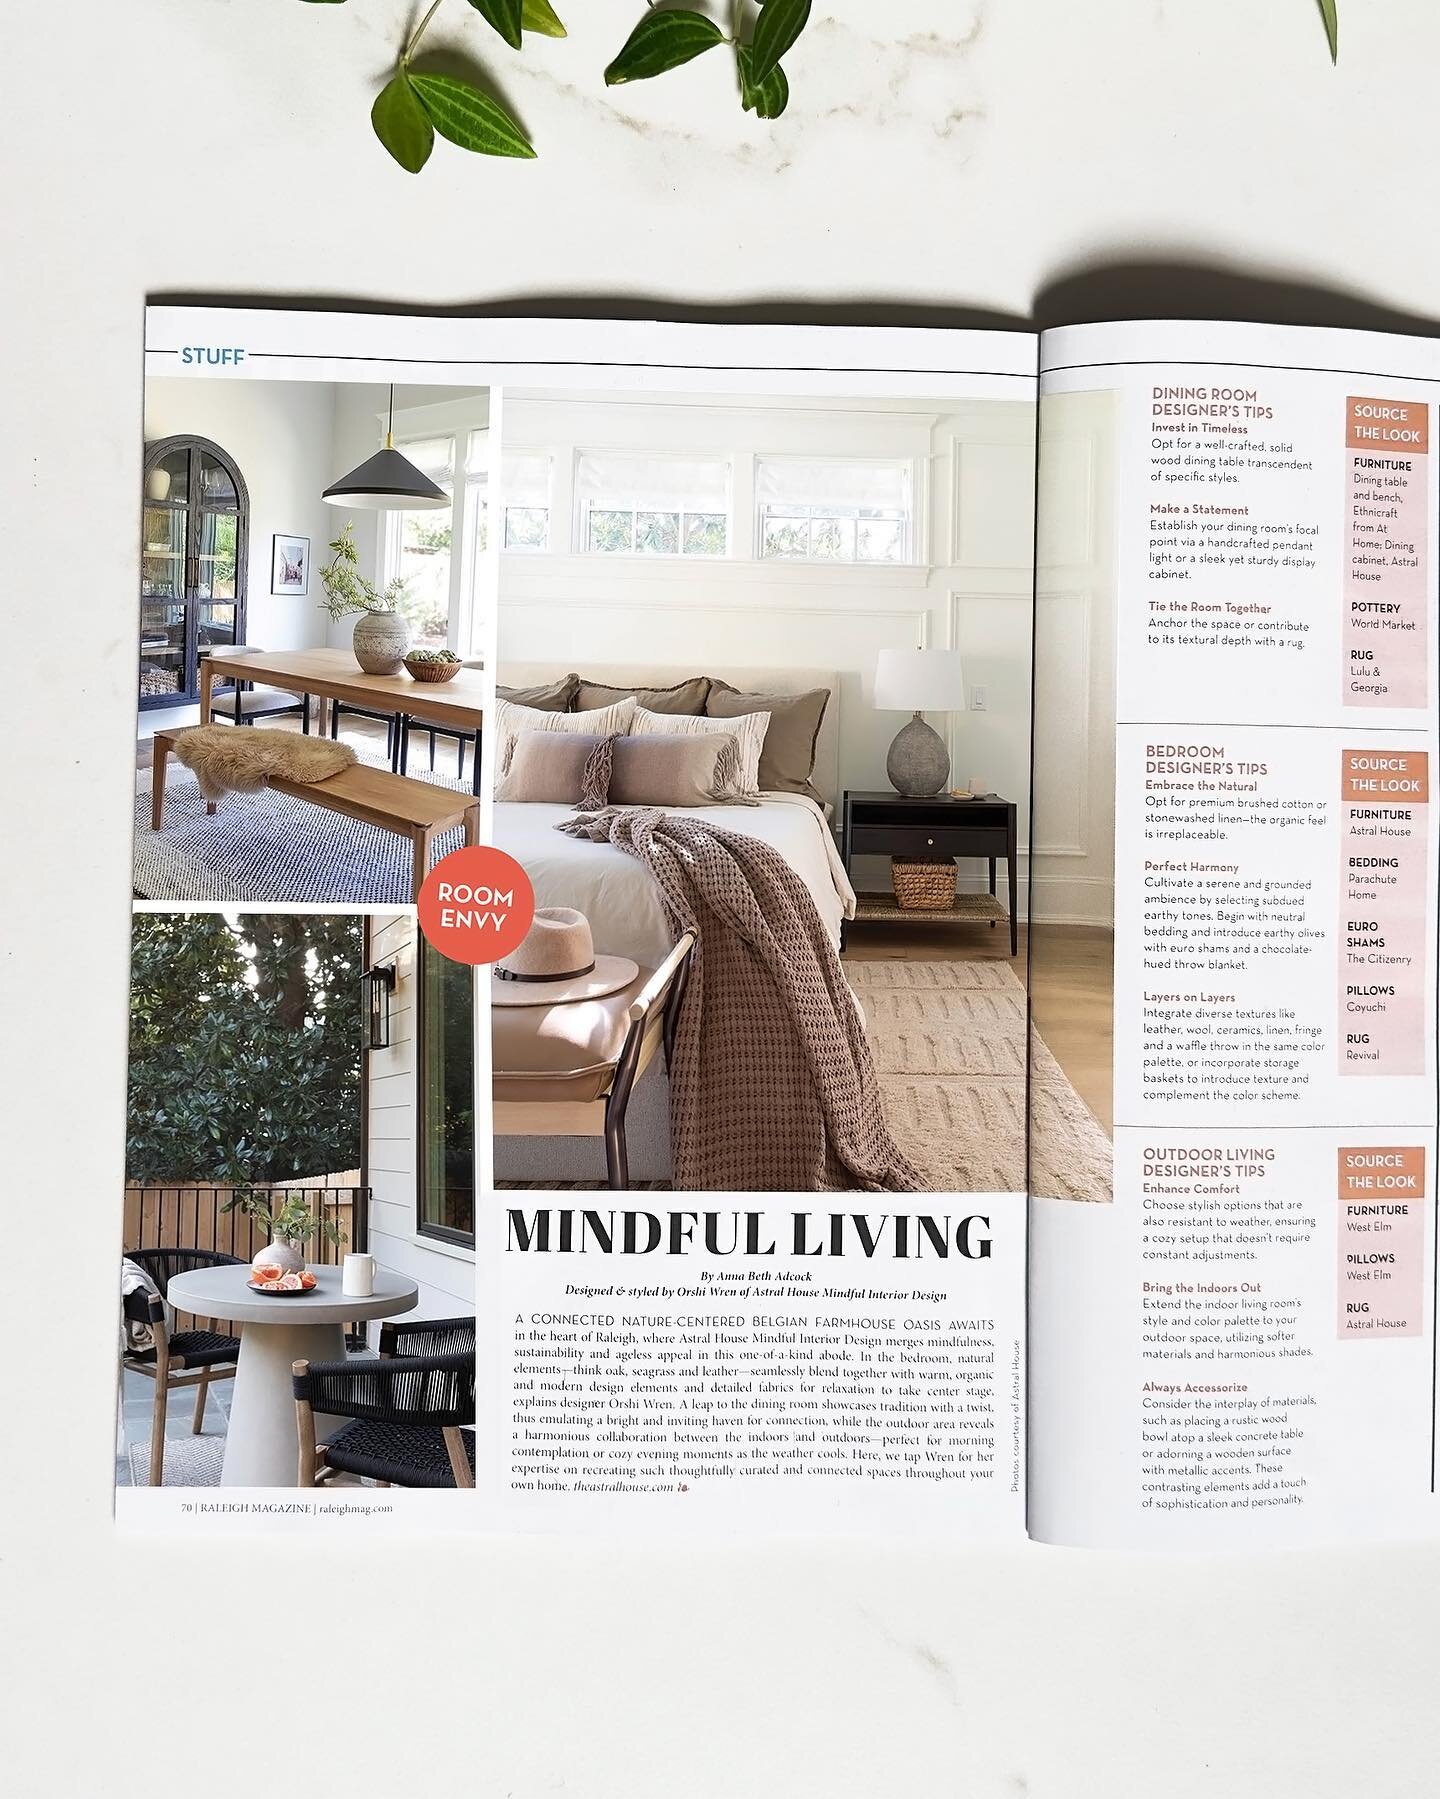 🌟 Exciting News! 🌟 Astral House is honored to be featured in this month's issue of Raleigh Magazine. We're thrilled to share a glimpse of a stunning home designed by our founder, Orshi Wren. Thank you Raleigh Magazine for the wonderful feature! 🏡✨